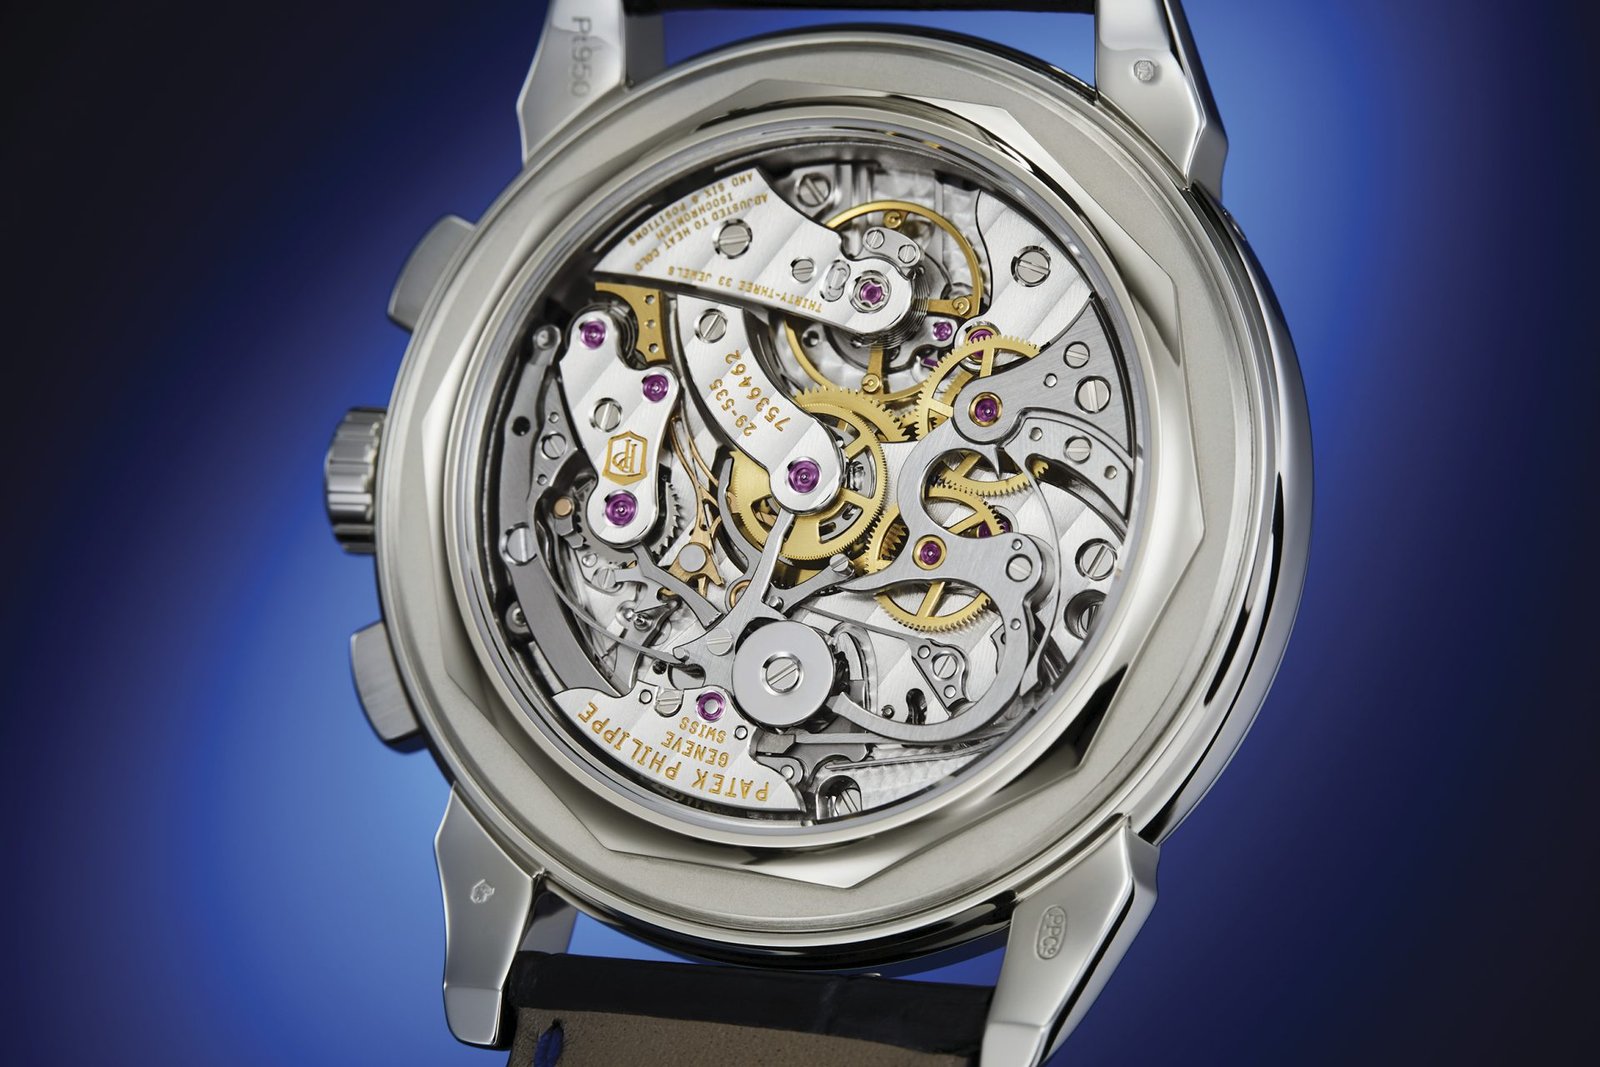 1692353190 366 An Exceptional Showcase by Patek Philippe